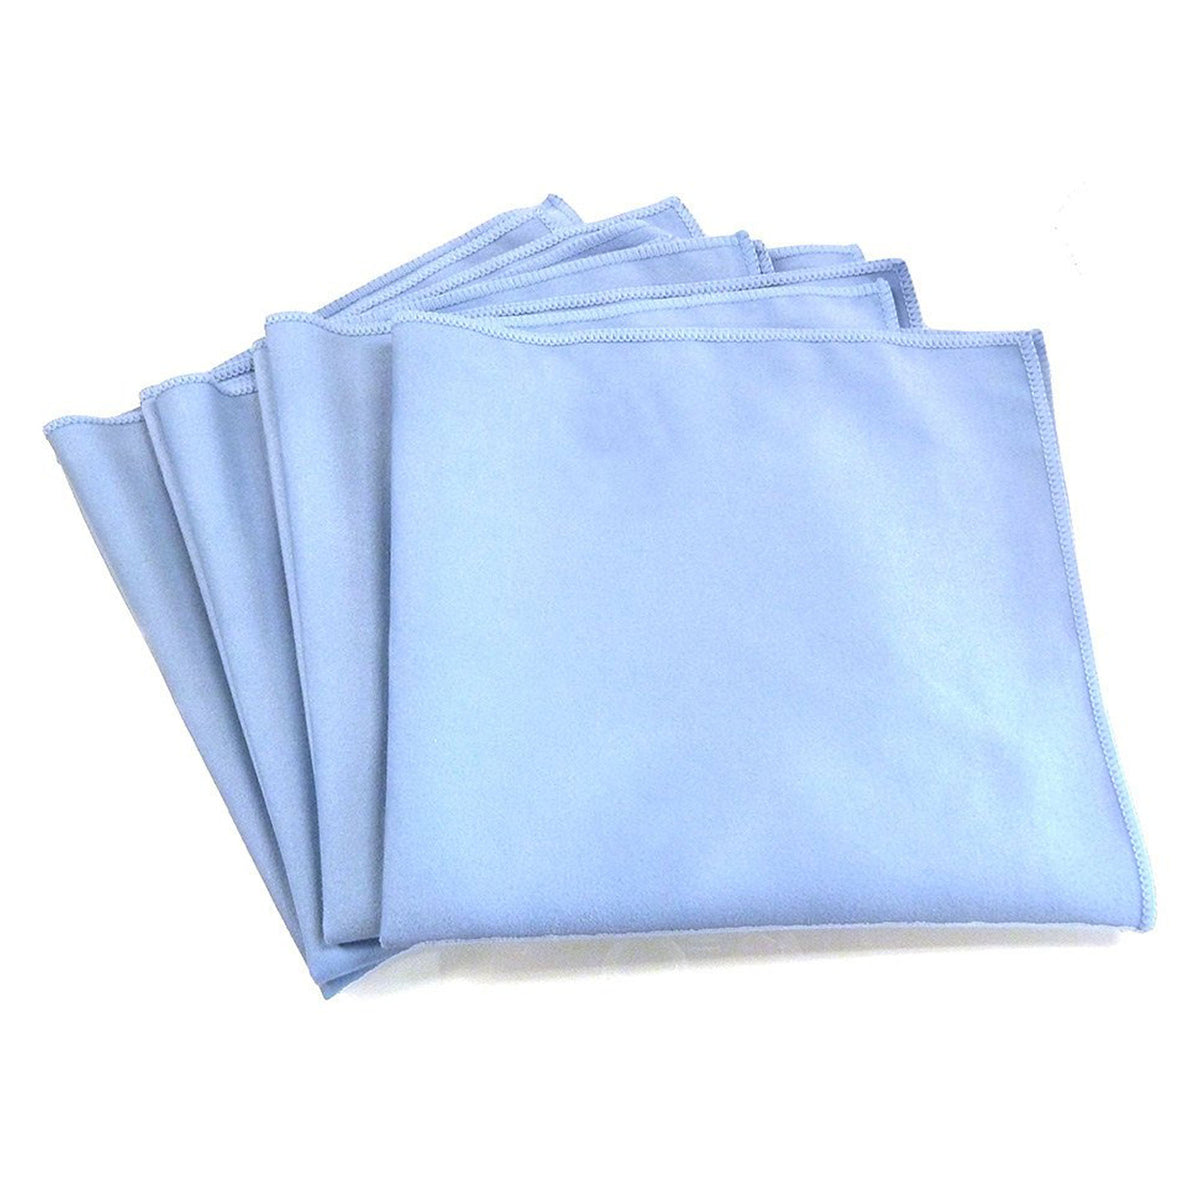 Commercial Grade Microfiber Cleaning Cloths Multipurpose - Glass